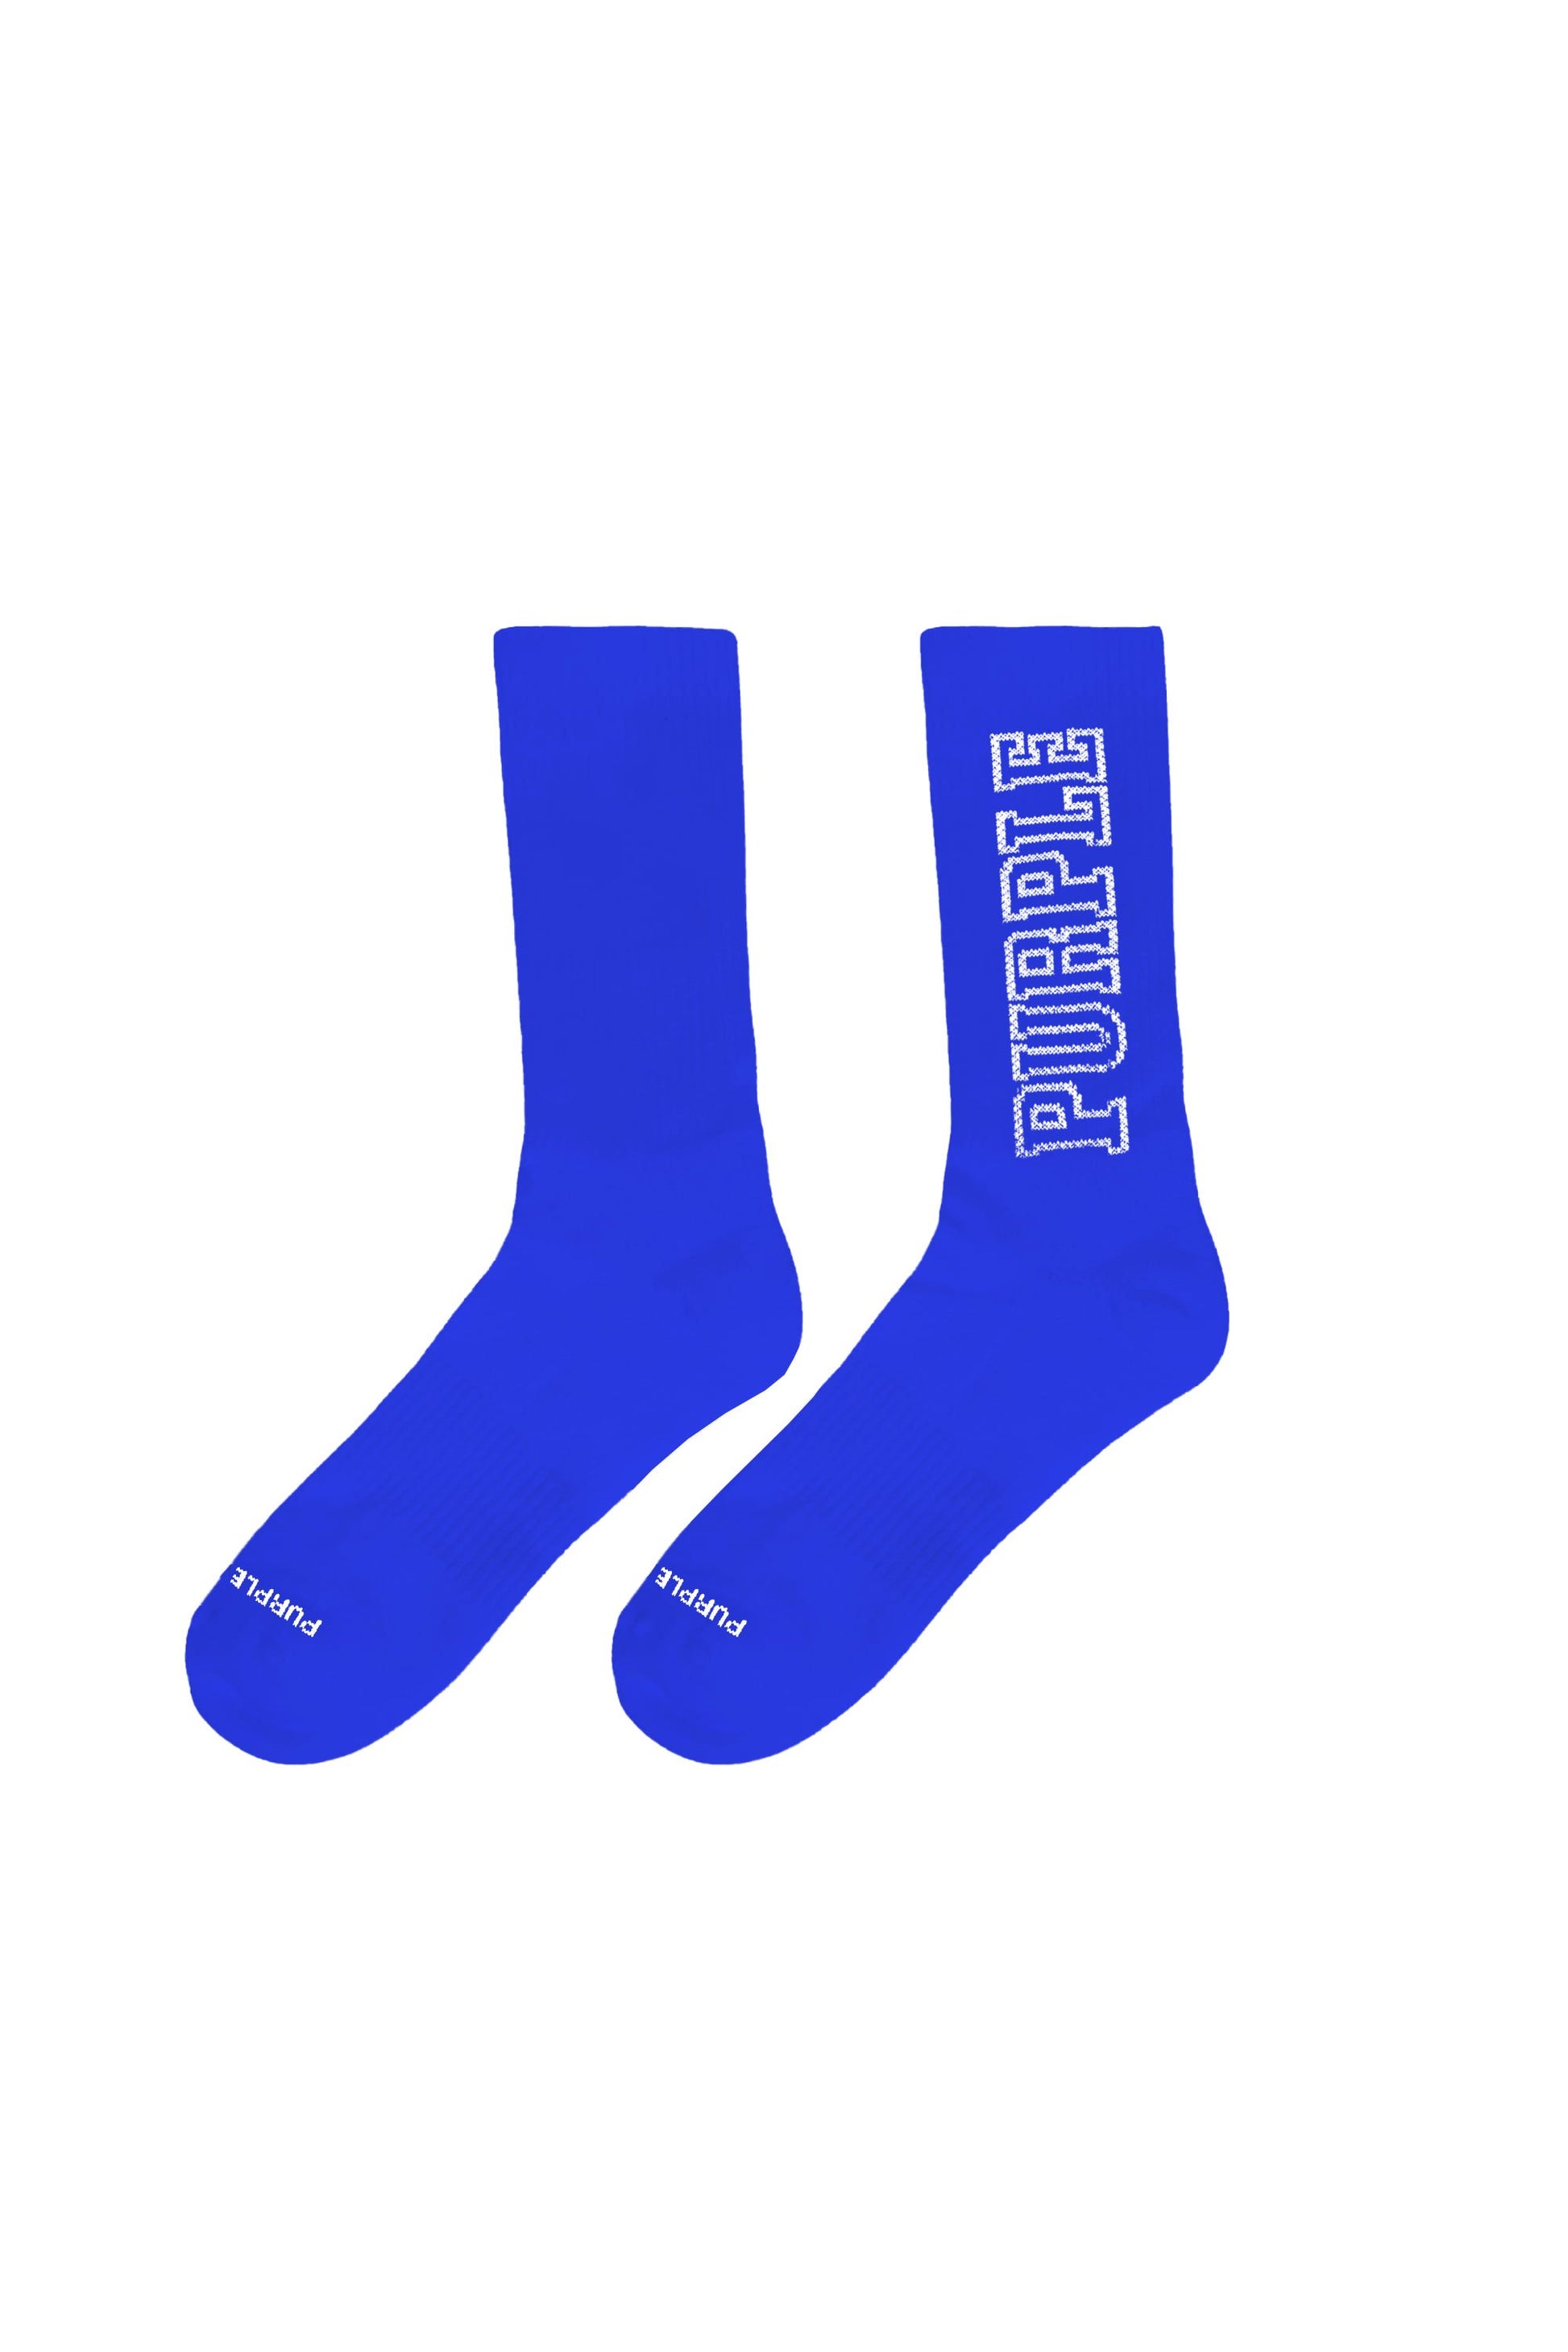 PURPLE BRAND - Socks - Style No. P907 - Multi Color 3 Pack Blue - Front